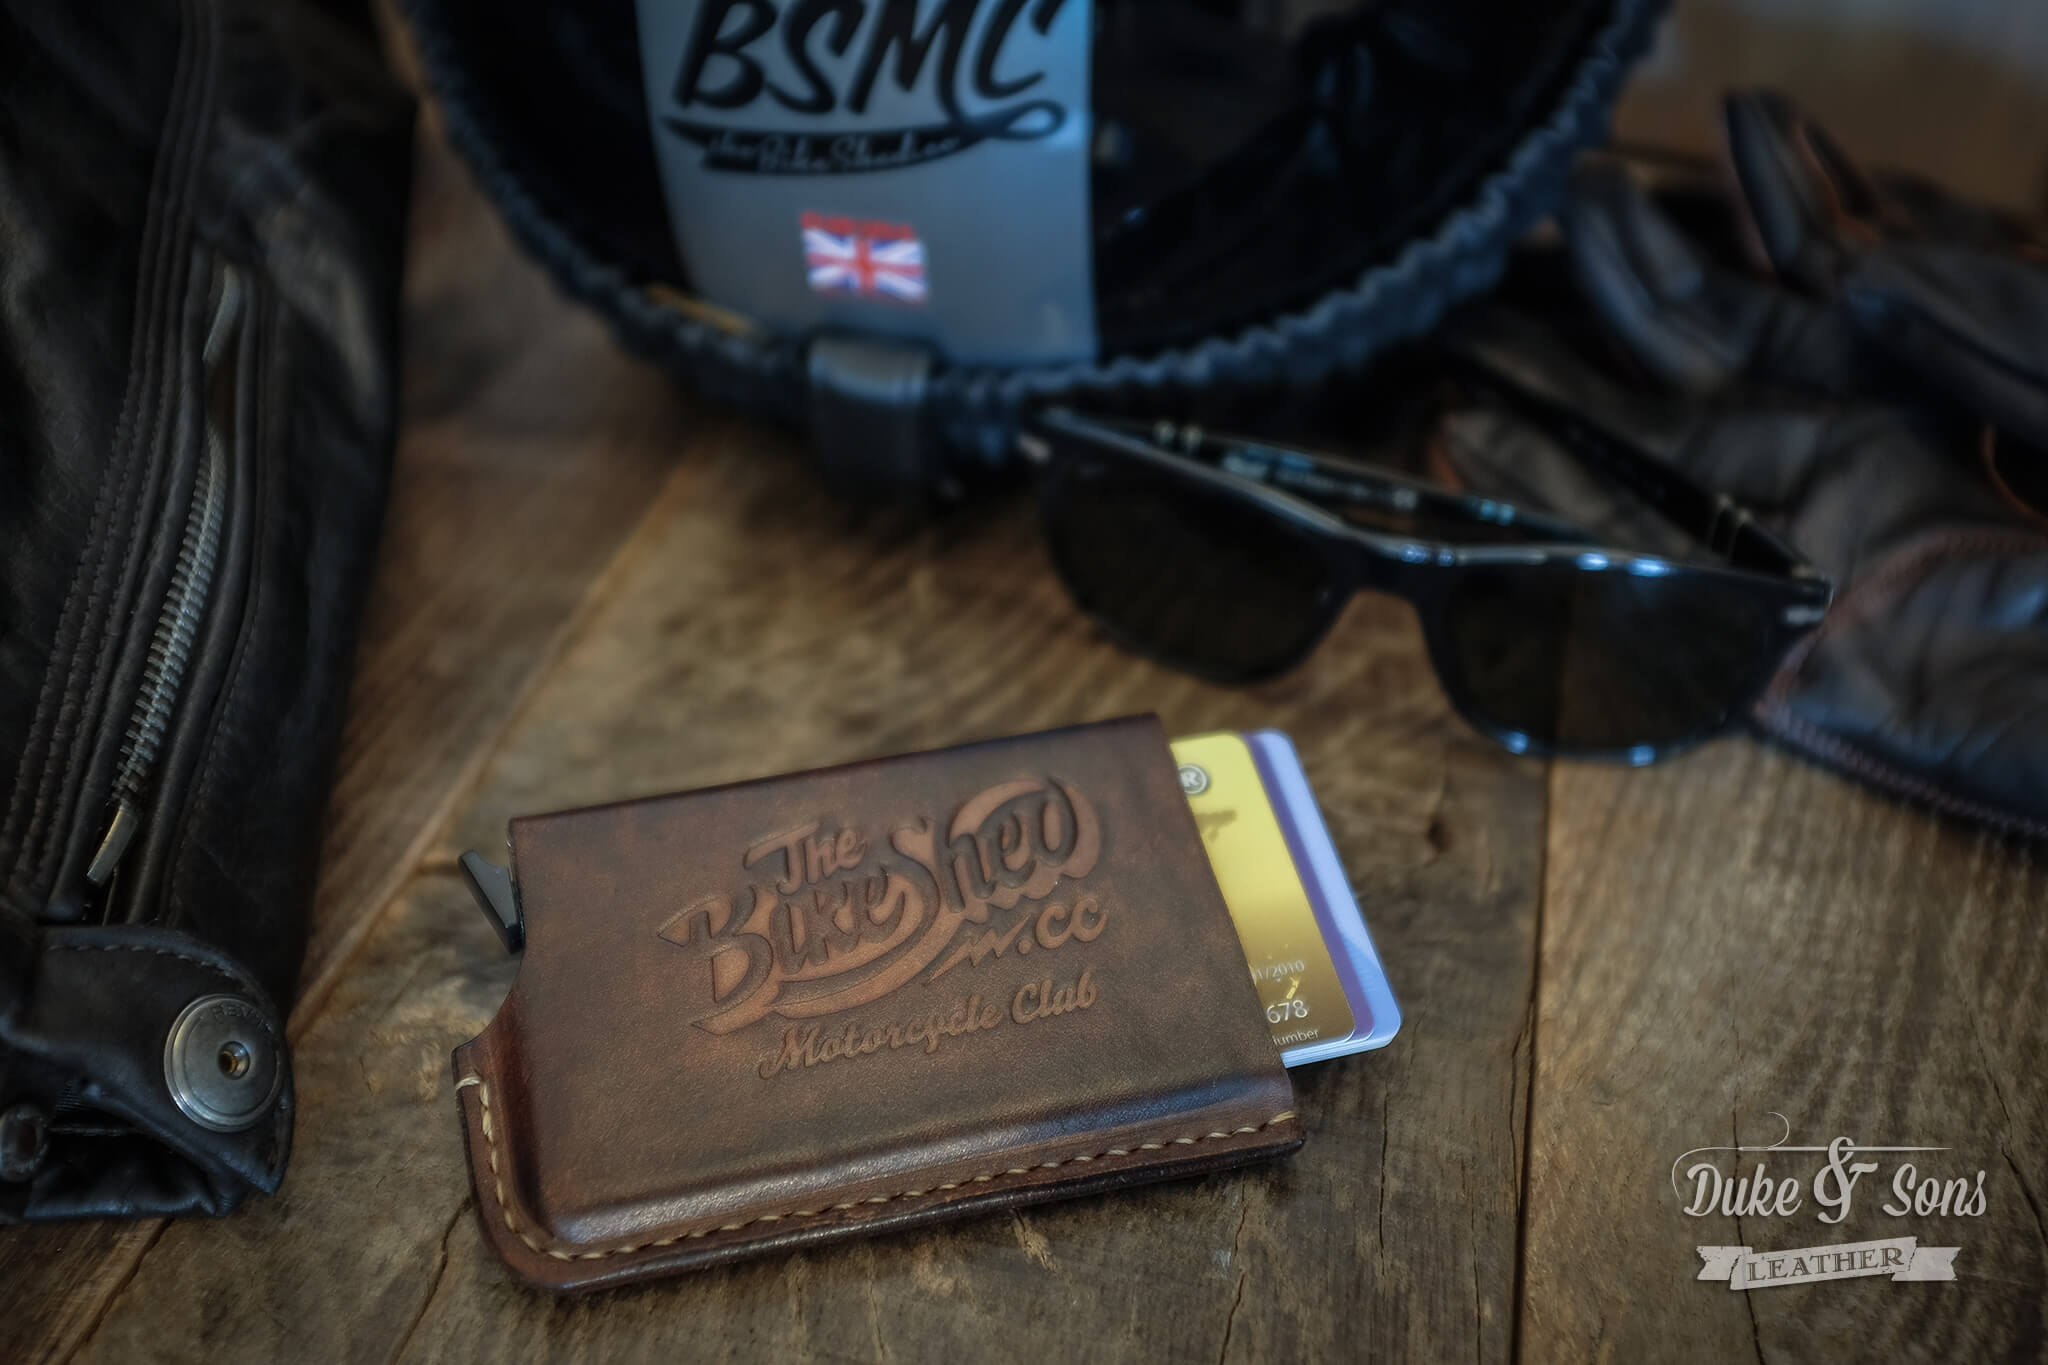 The Bike Shed Motorcycle Club card wallet